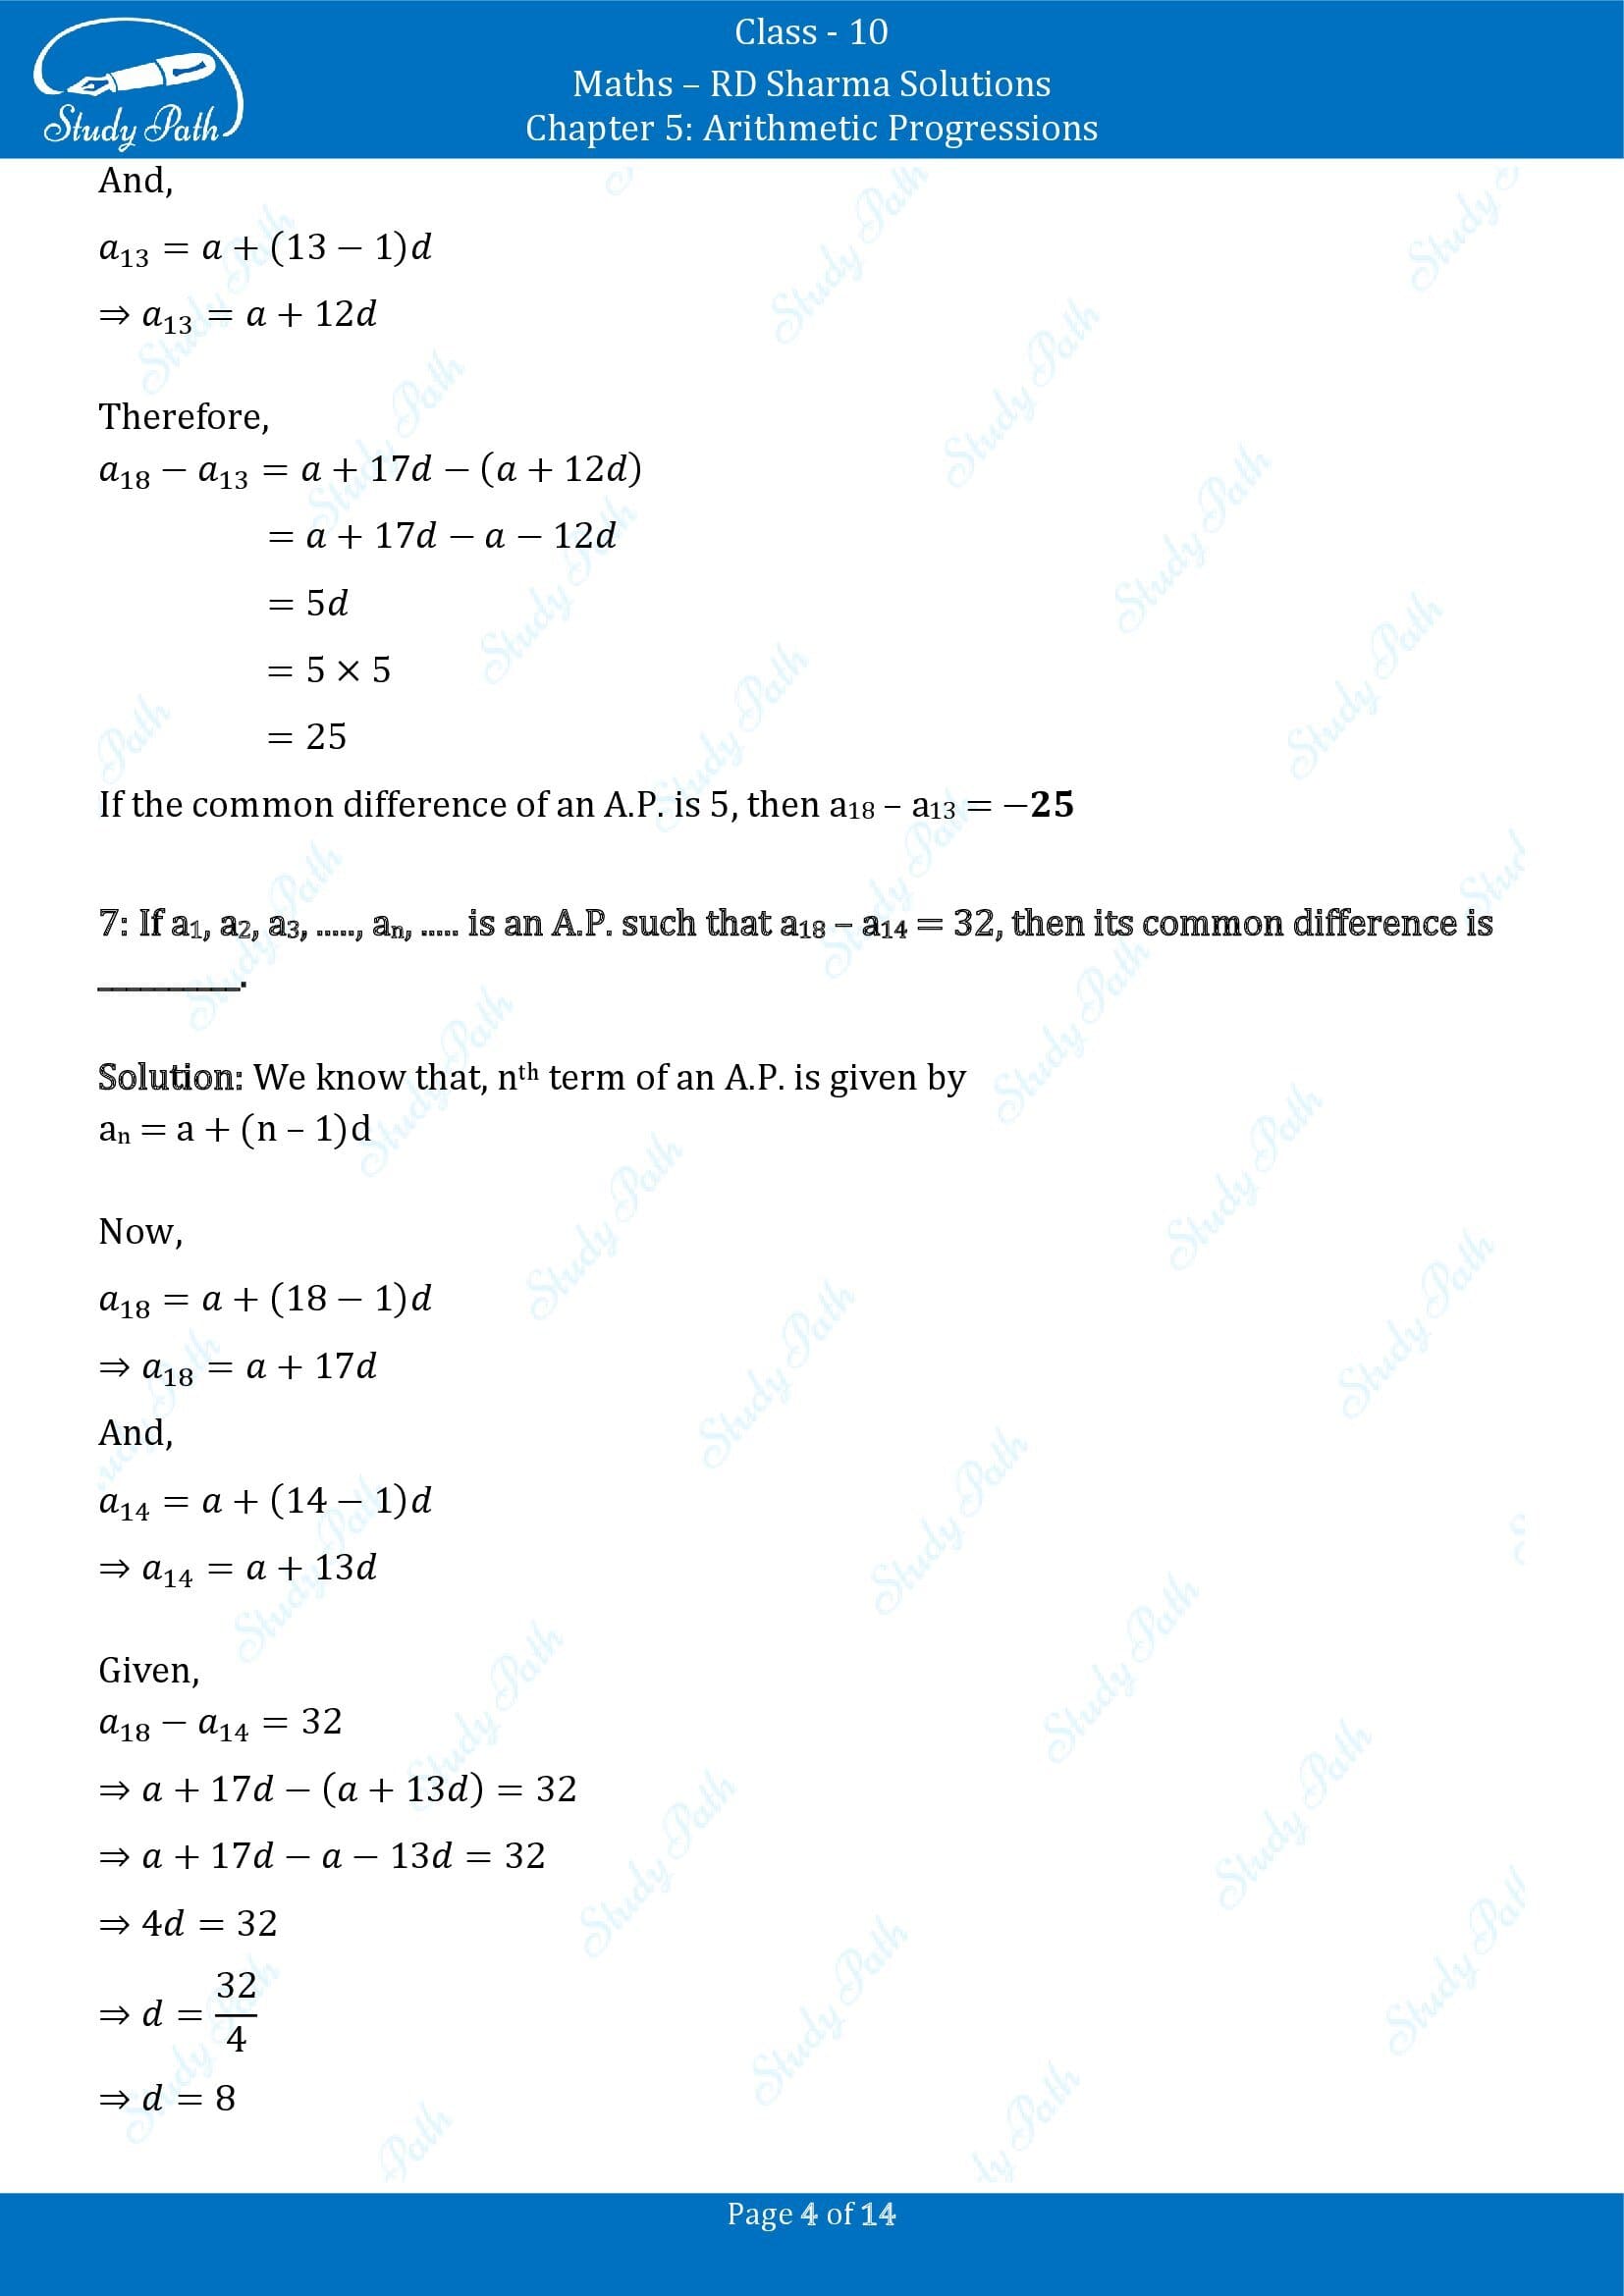 RD Sharma Solutions Class 10 Chapter 5 Arithmetic Progressions Fill in the Blank Type Questions FBQs 00004